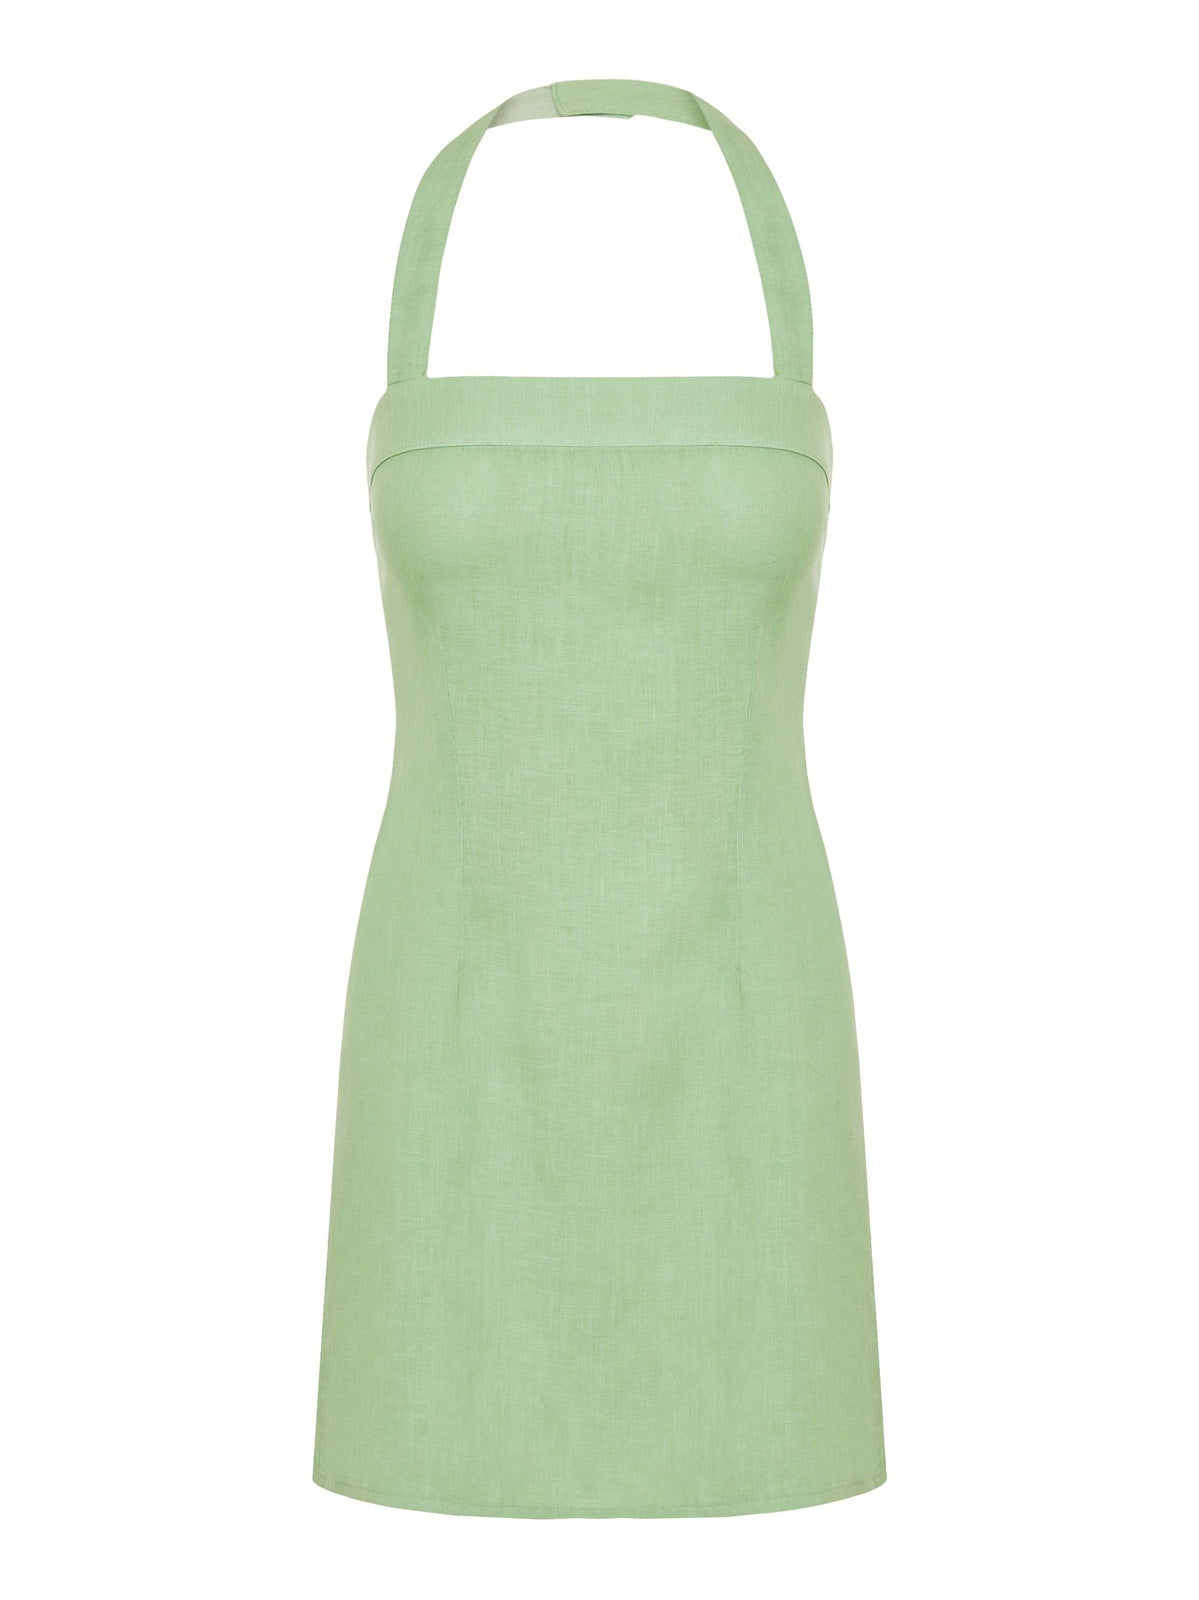 The Katie dress in Matcha